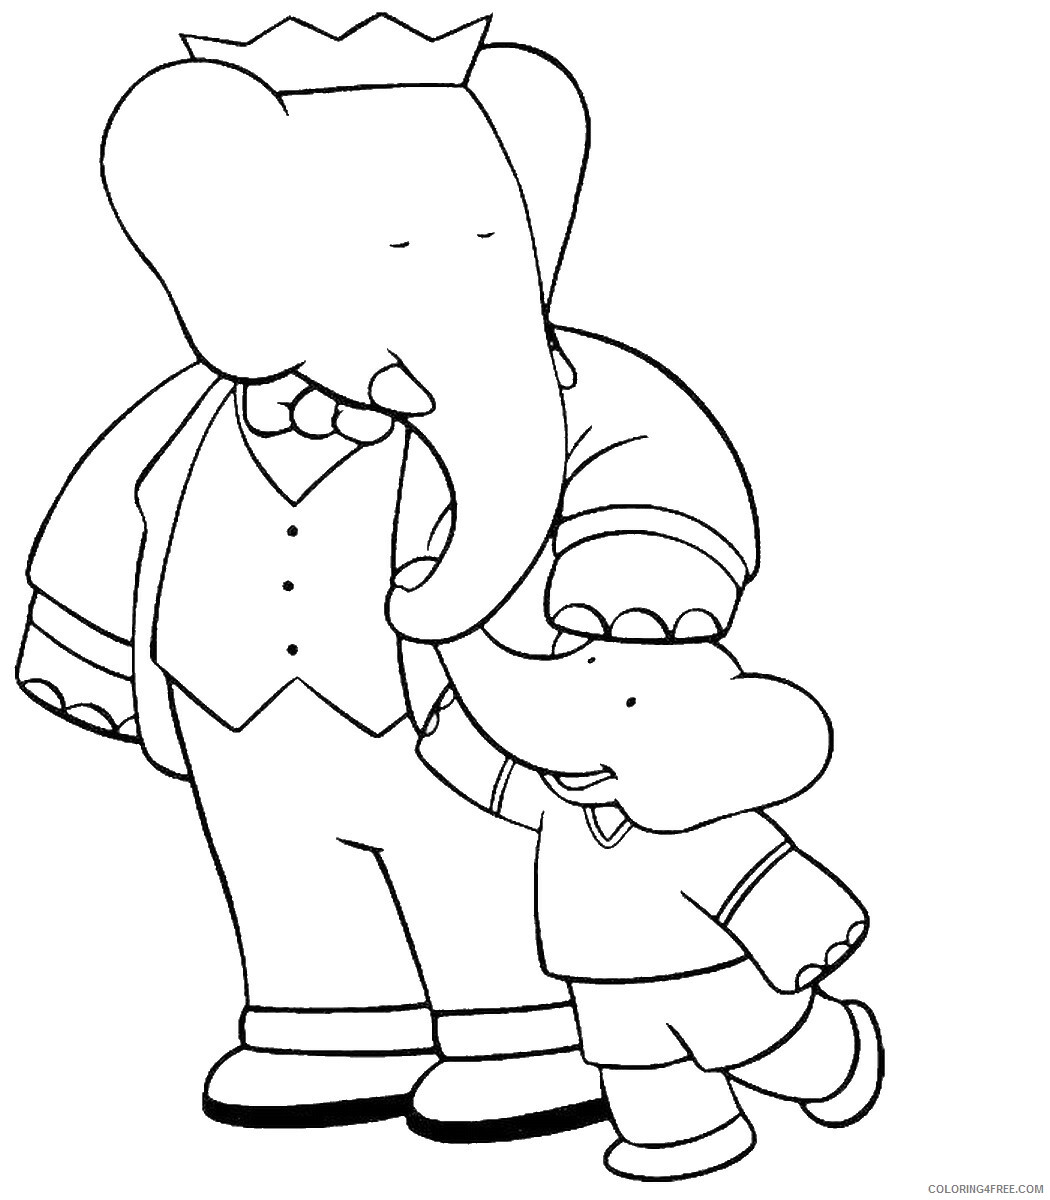 Babar Coloring Pages TV Film babar_cl_09 Printable 2020 00365 Coloring4free